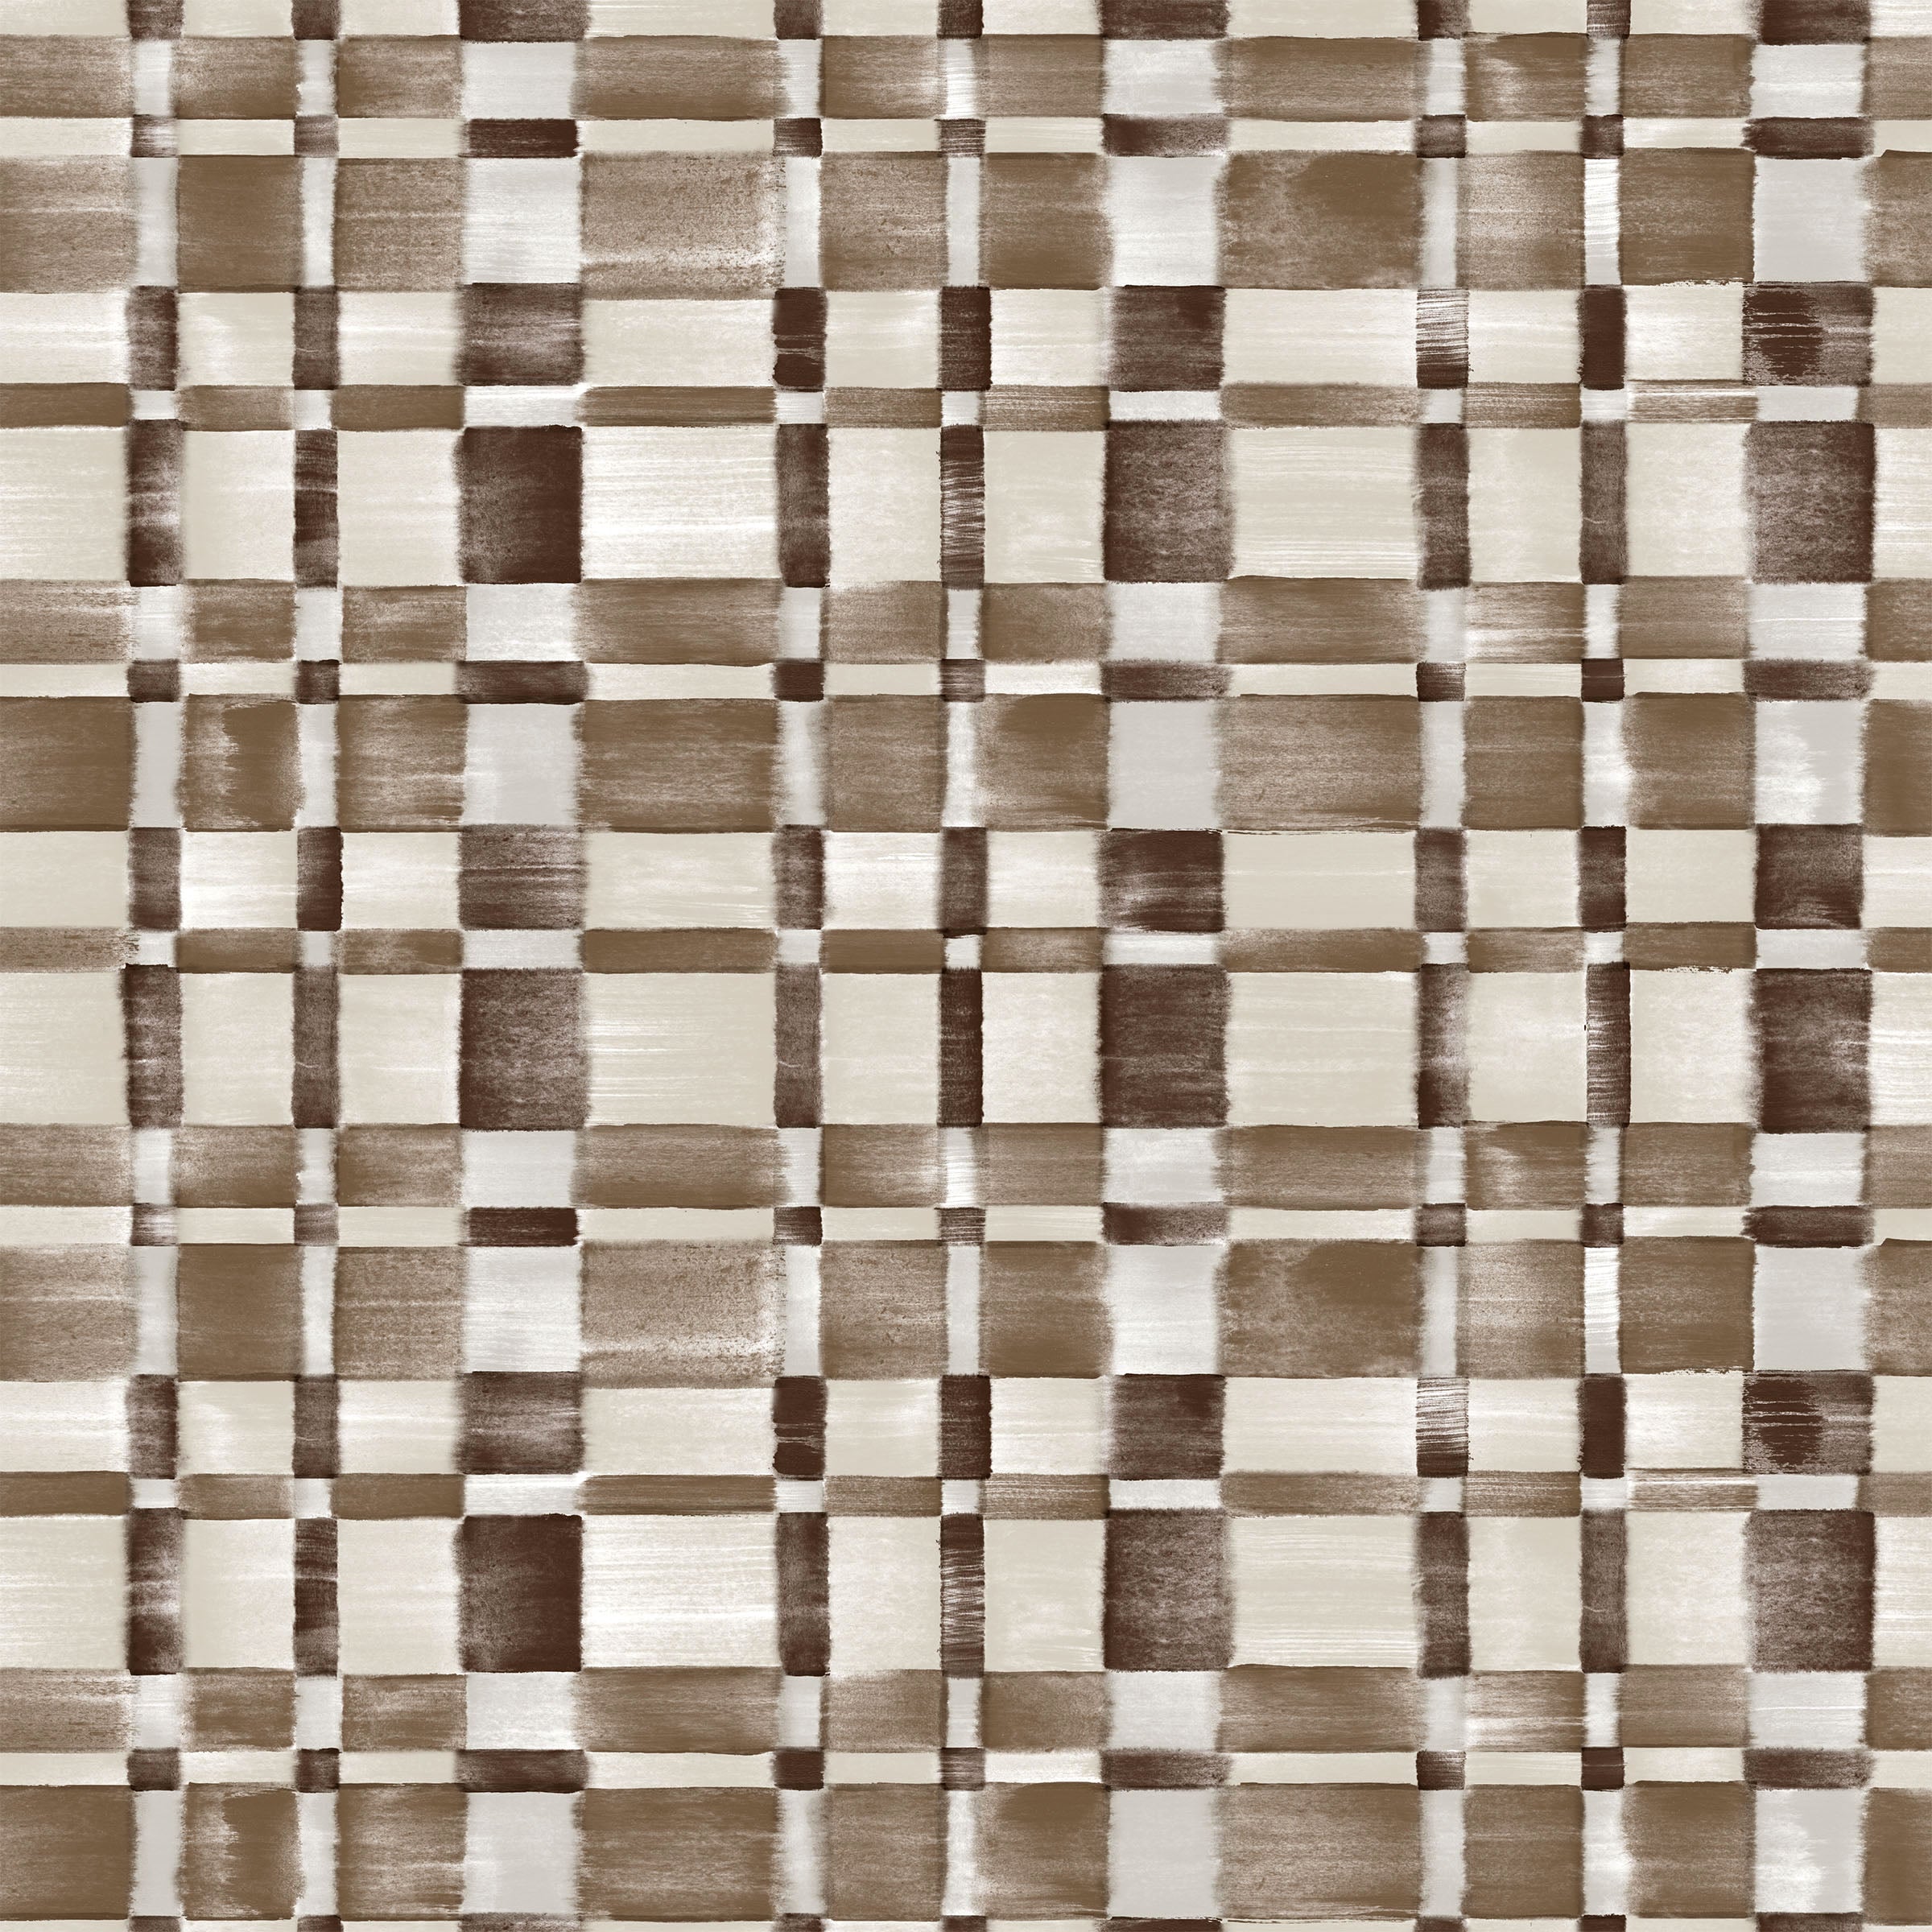 Detail of fabric in a large-scale checked pattern in shades of cream and brown.